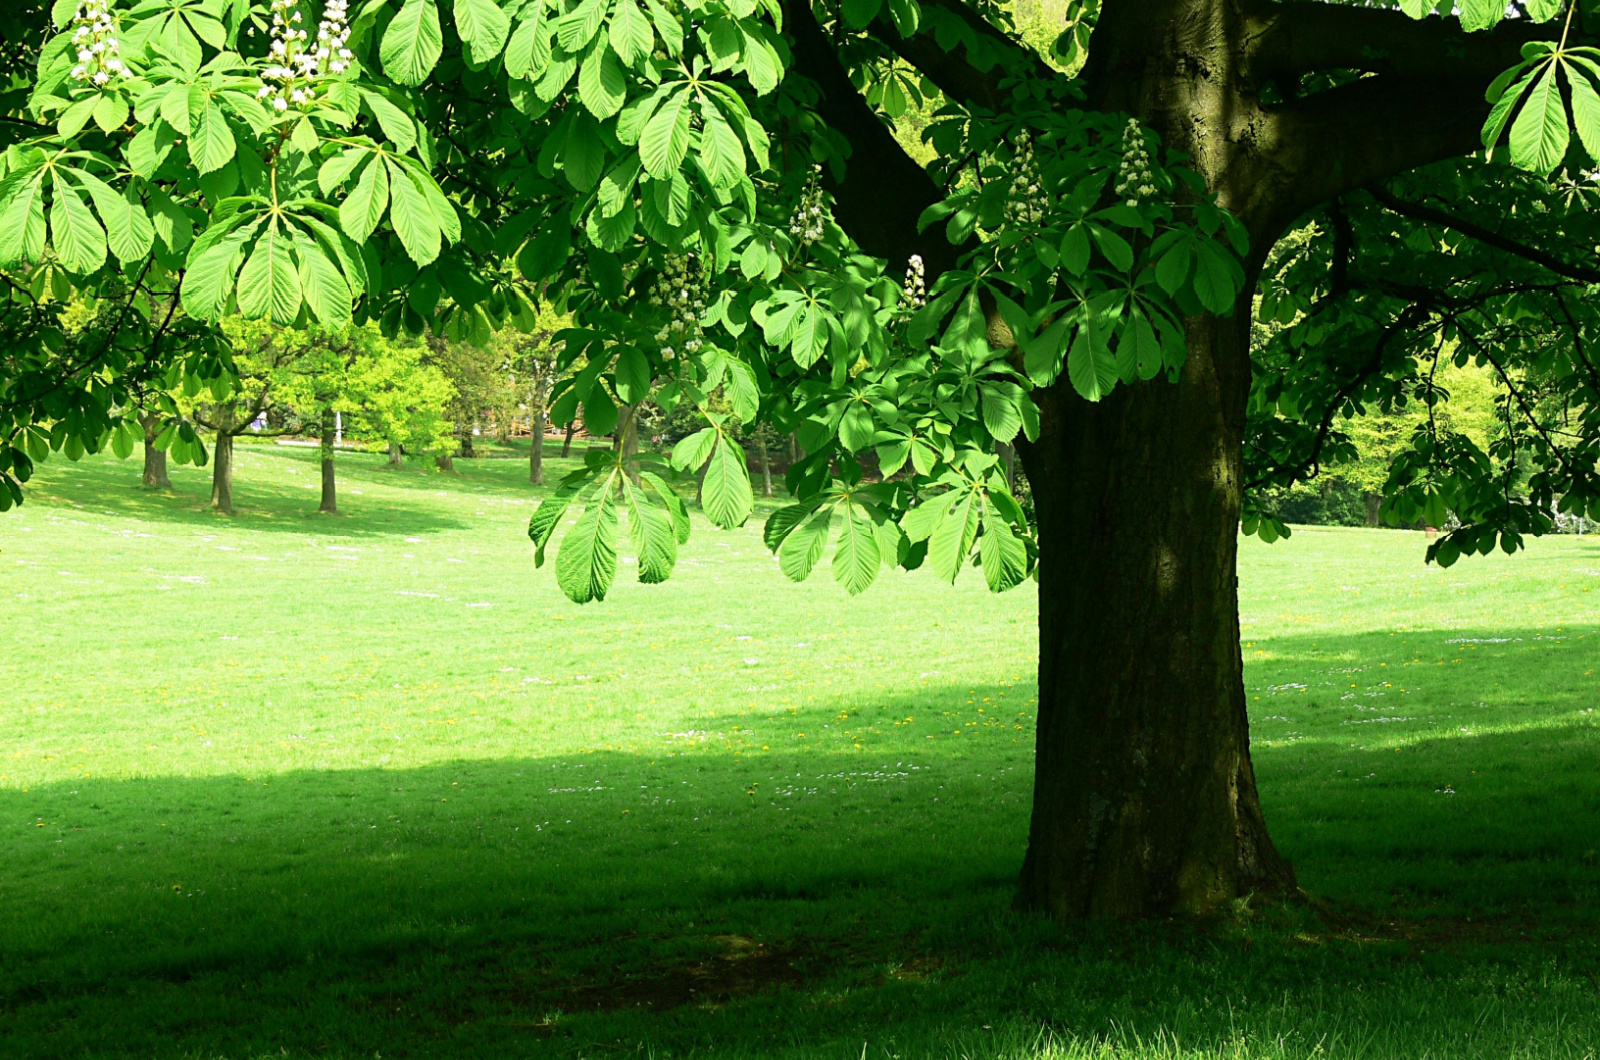 Chestnut tree and green lawn